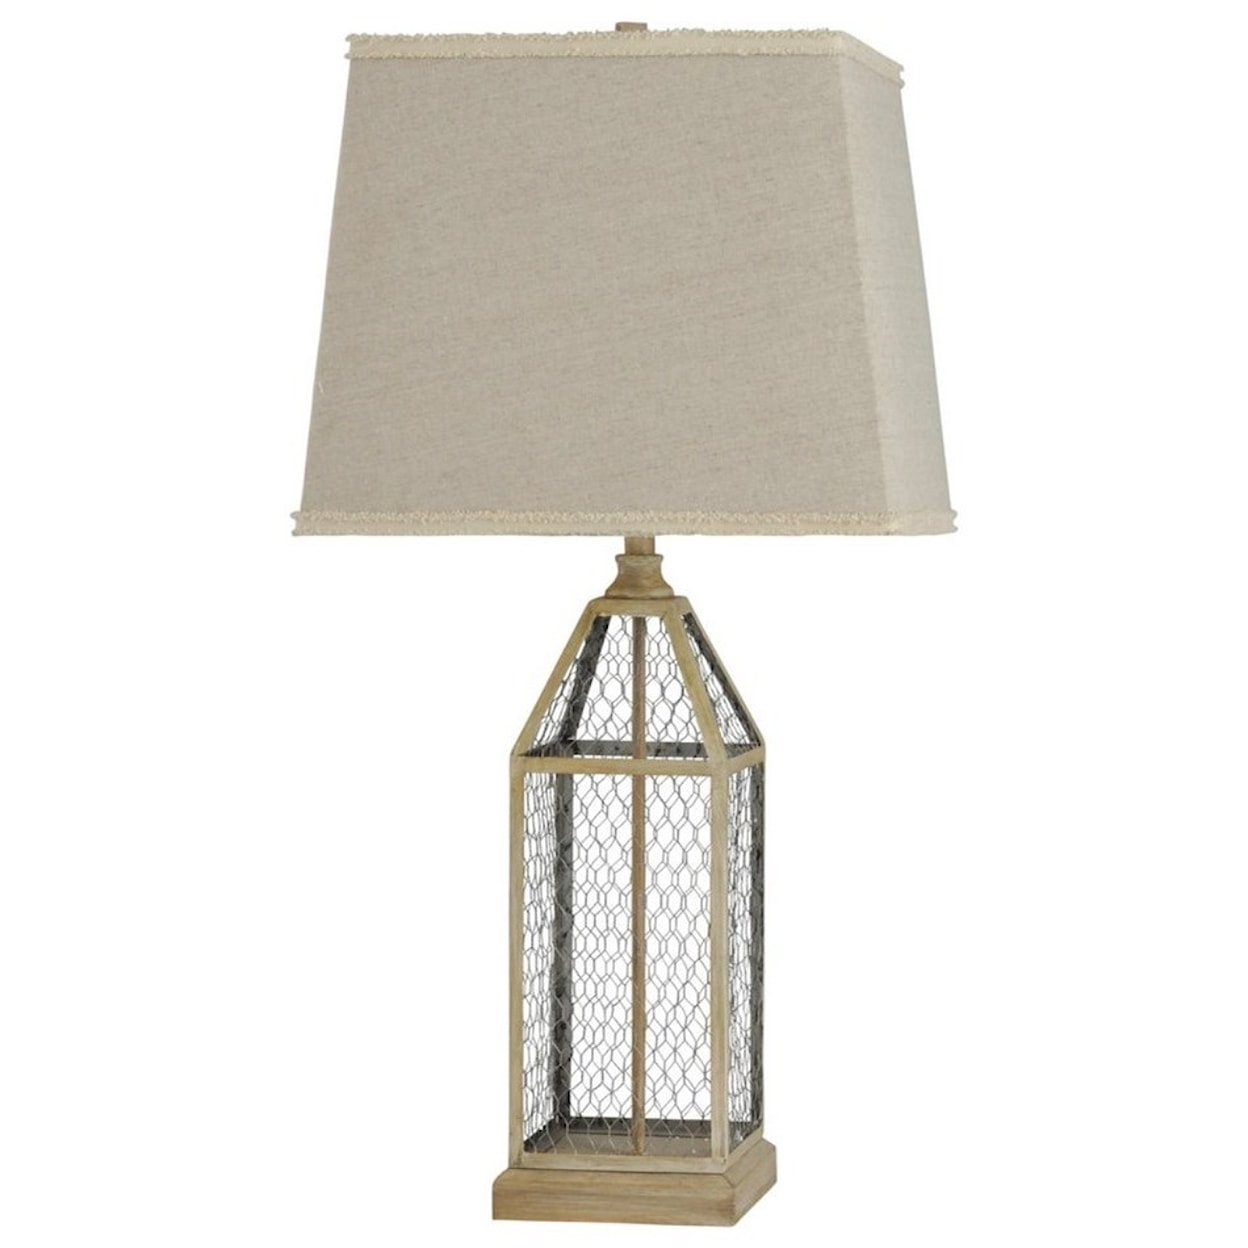 StyleCraft Lamps Chicken Wire Table Lamp